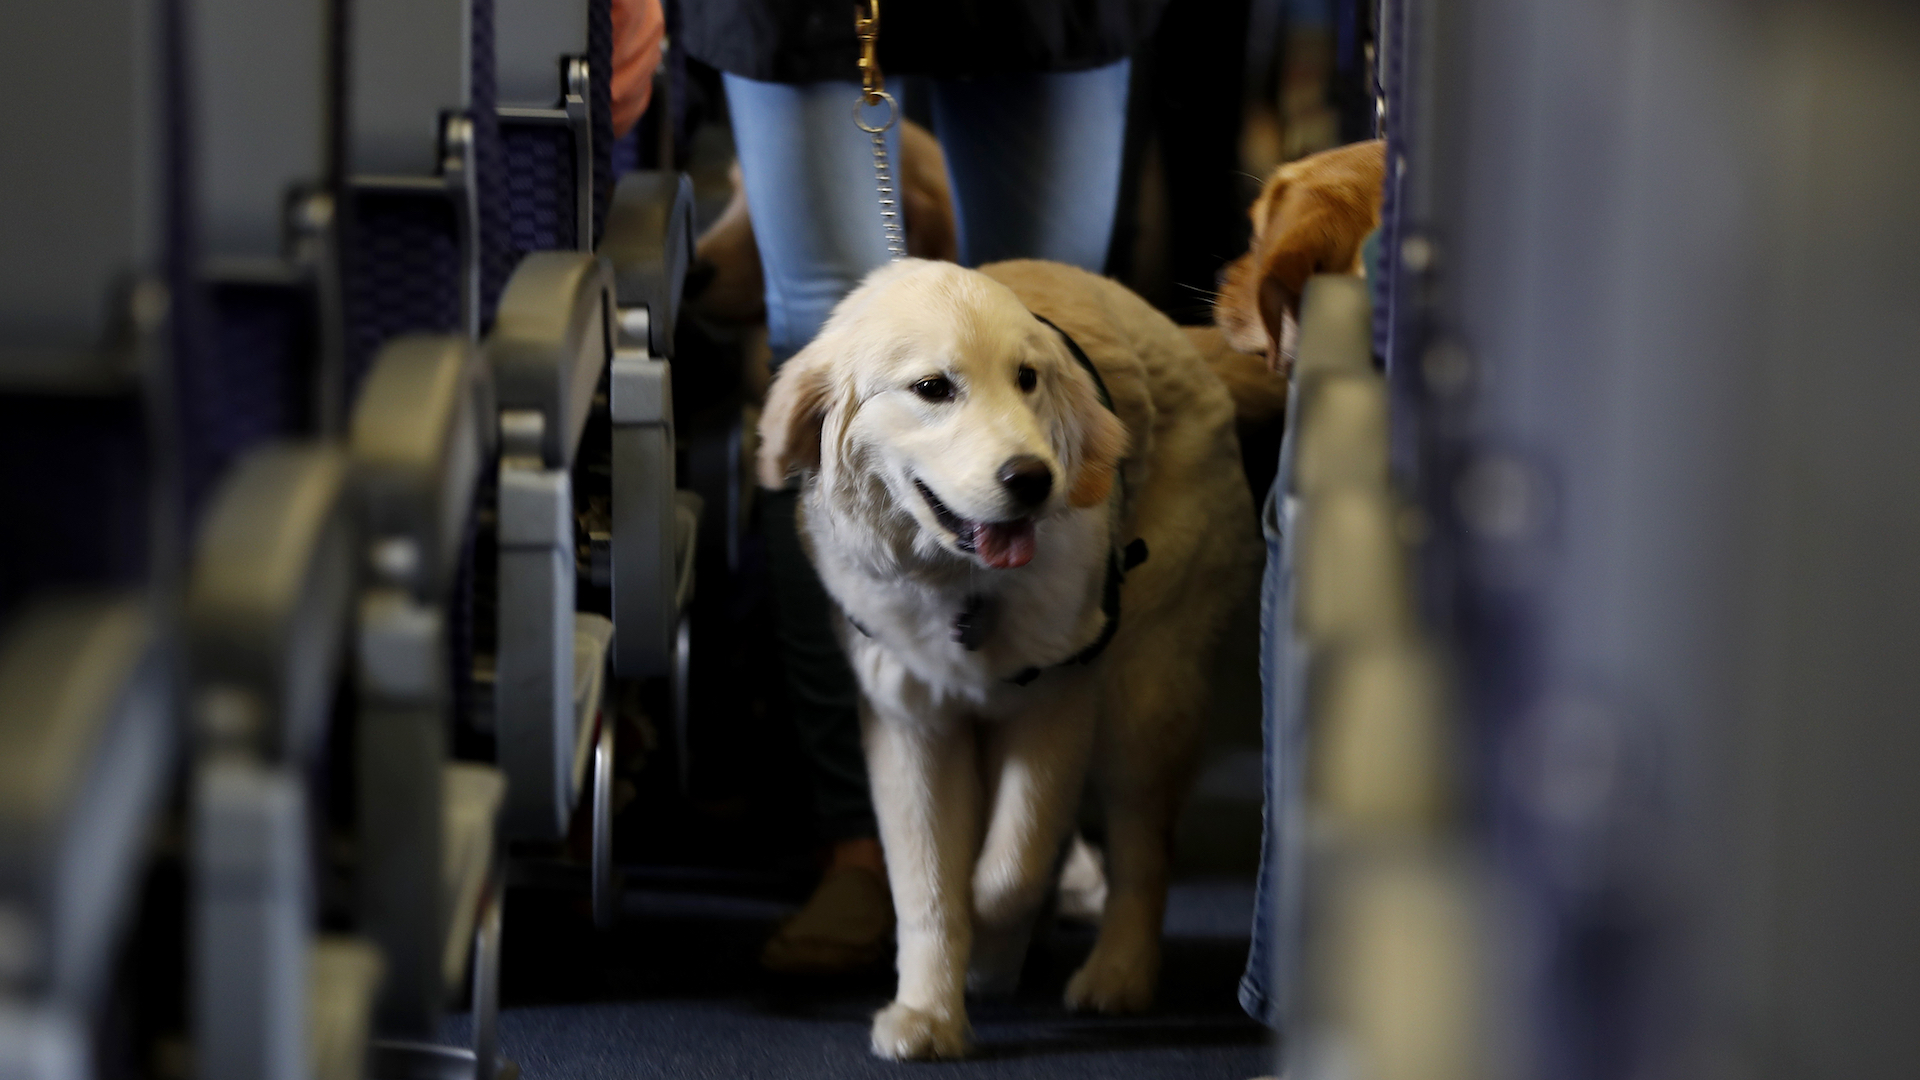 Fur And Fury At 40 000 Feet As More People Bring Animals On Planes The Washington Post